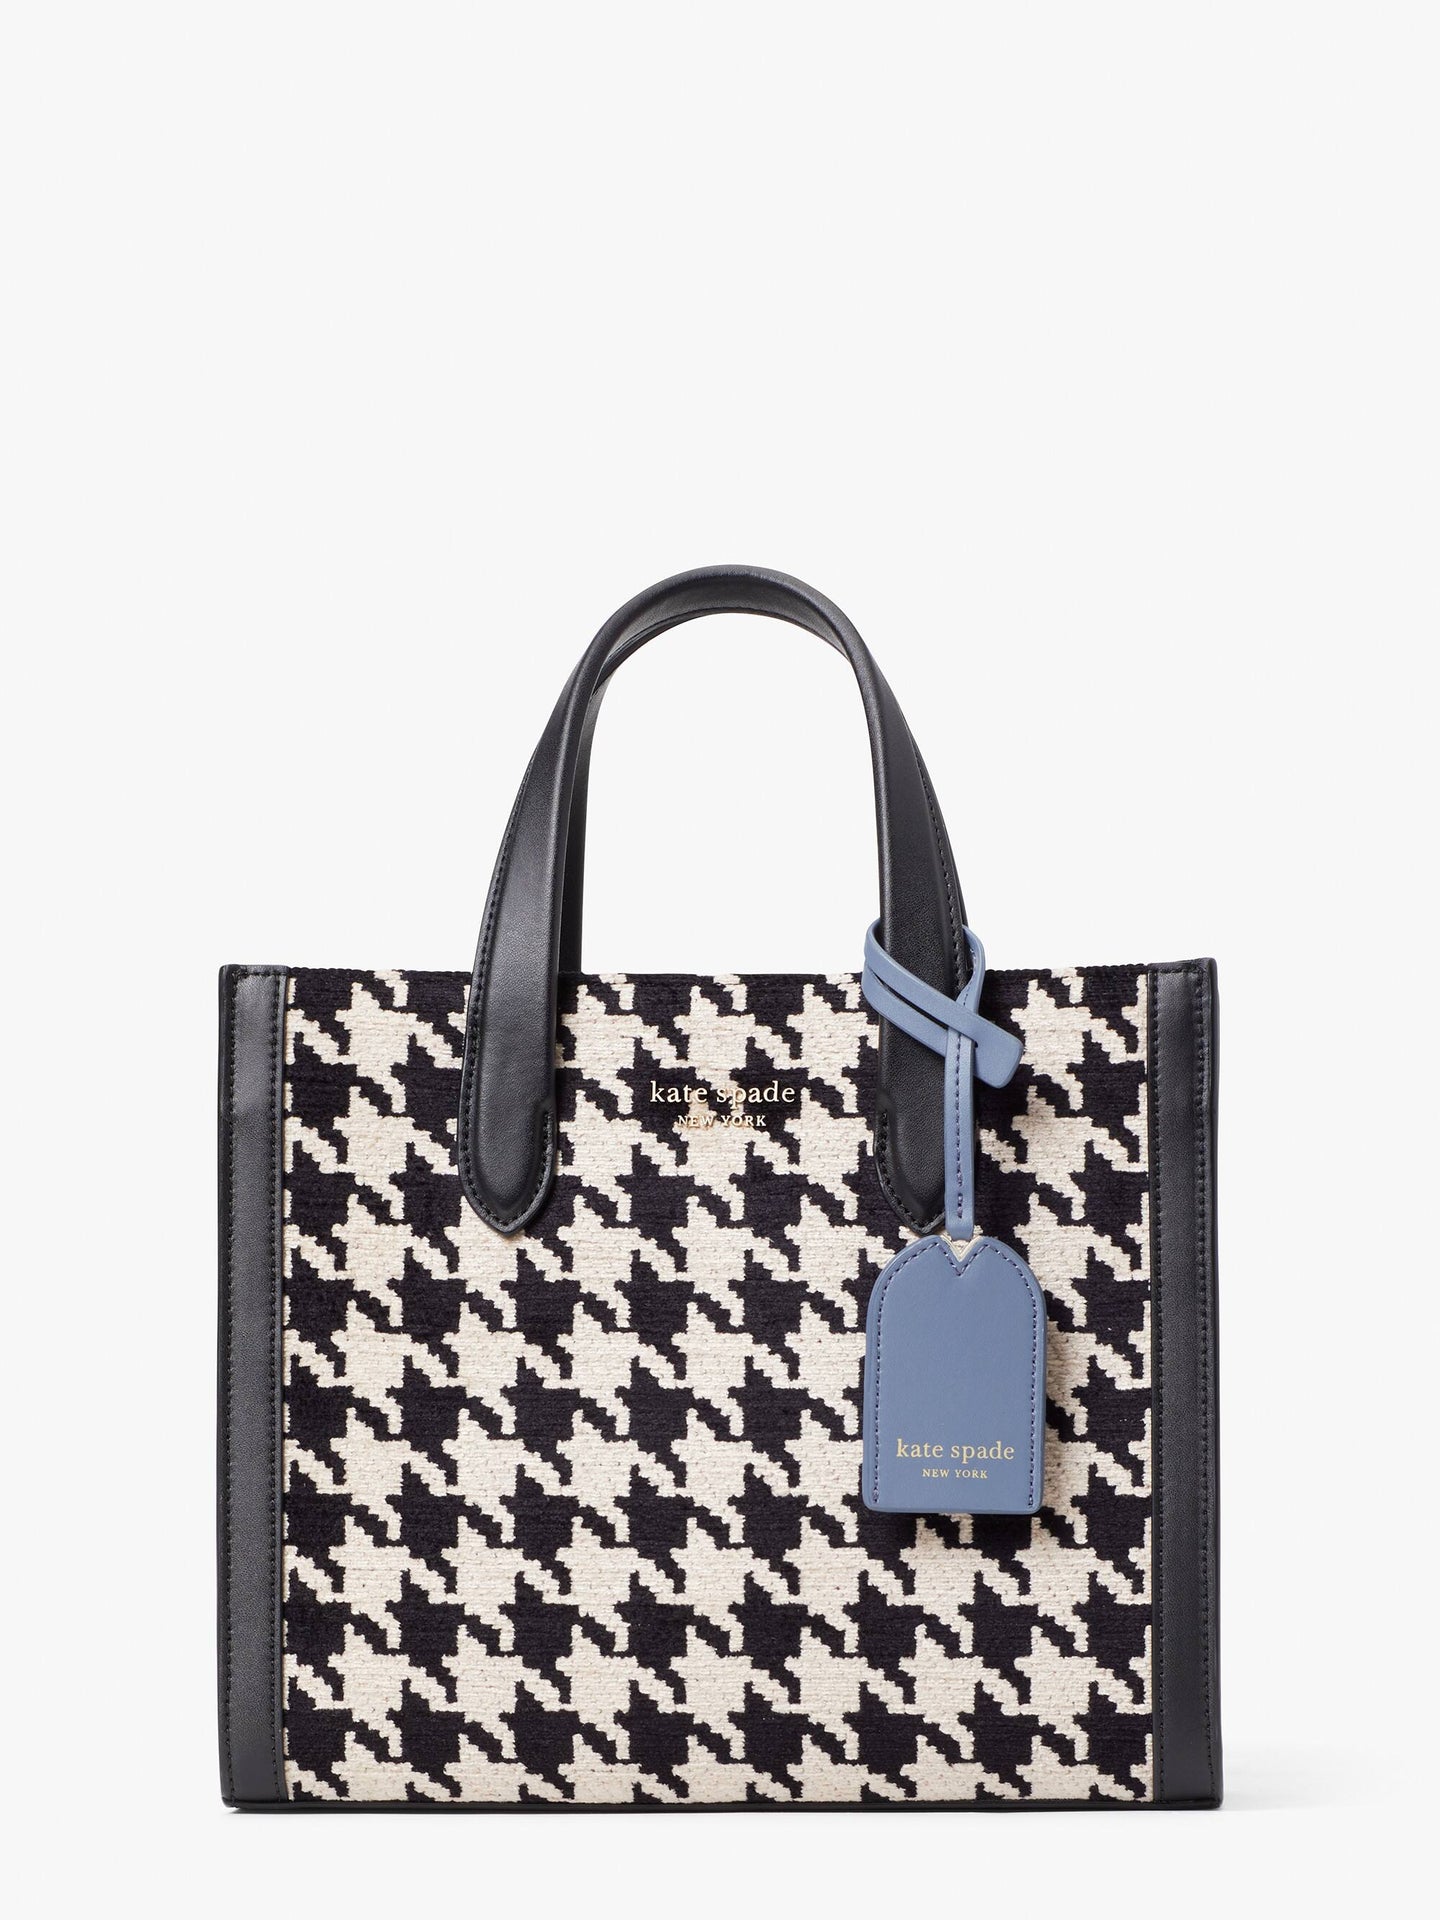 MANHATTAN HOUNDSTOOTH CHENILLE SMALL TOTE